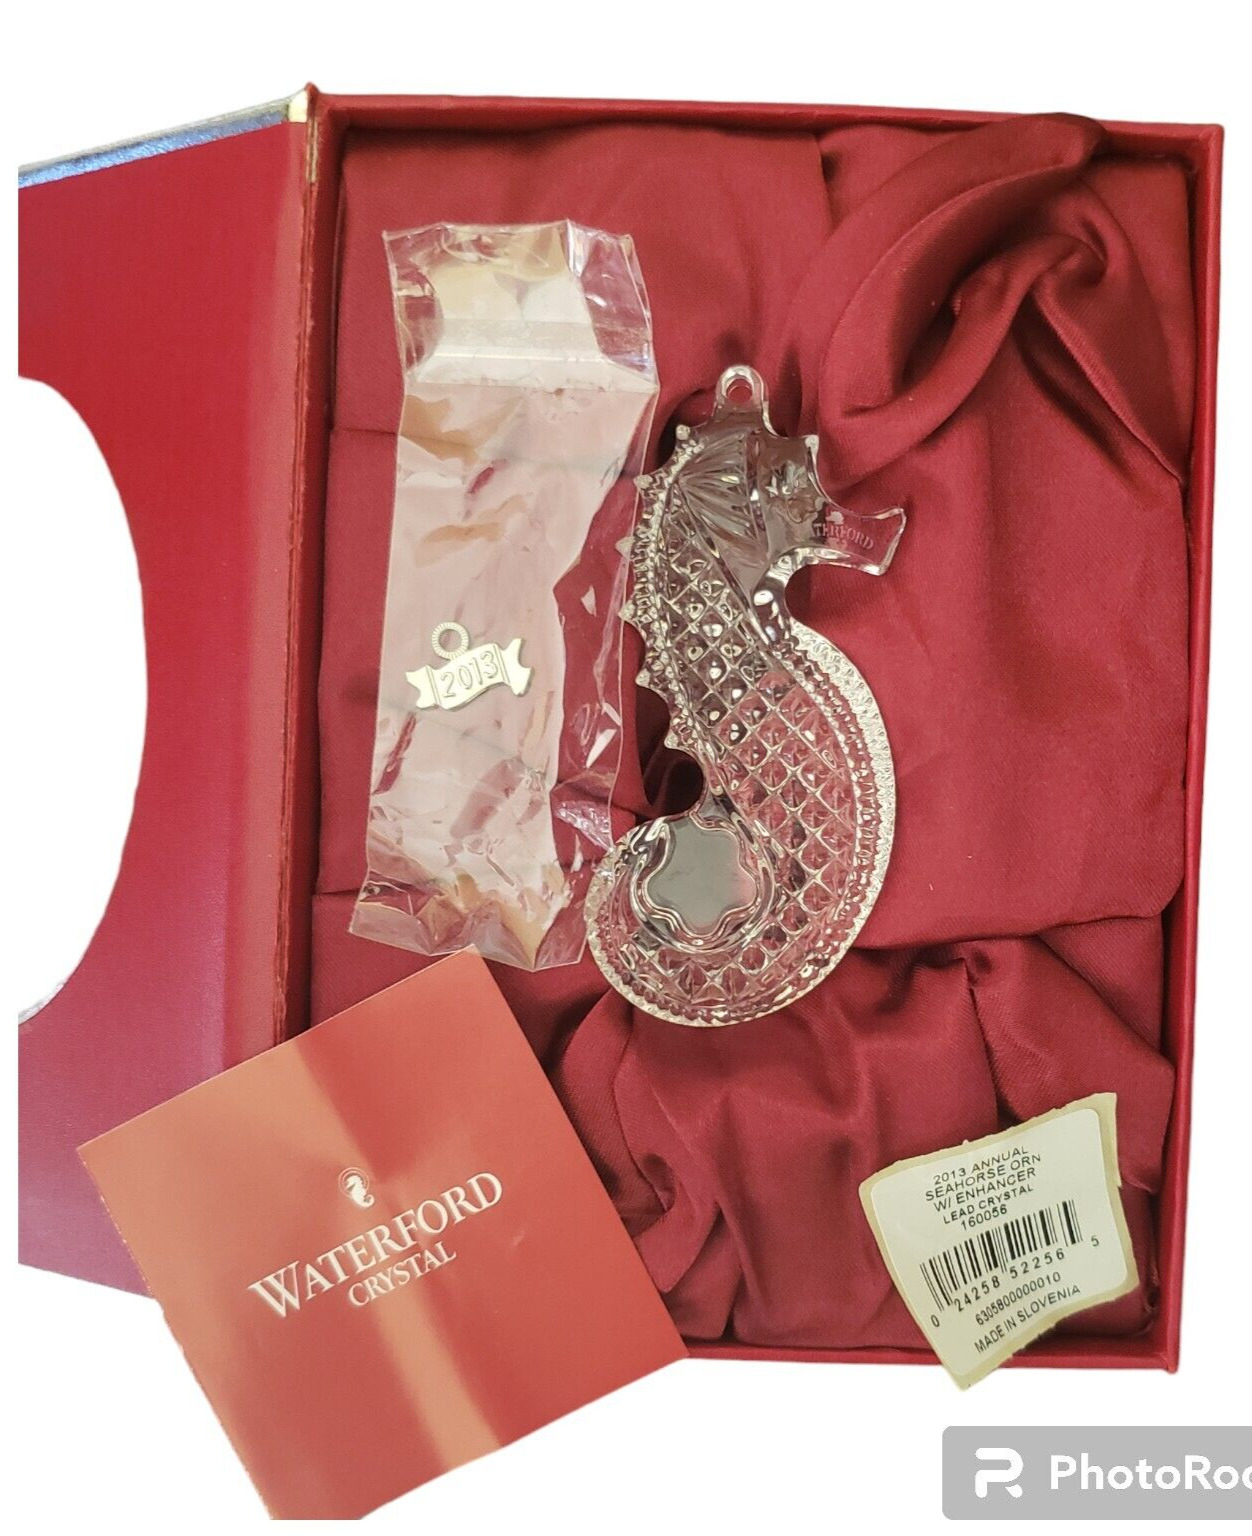 2013 Waterford Crystal Seahorse Hanging Ornament With Enhancer Papers And Box